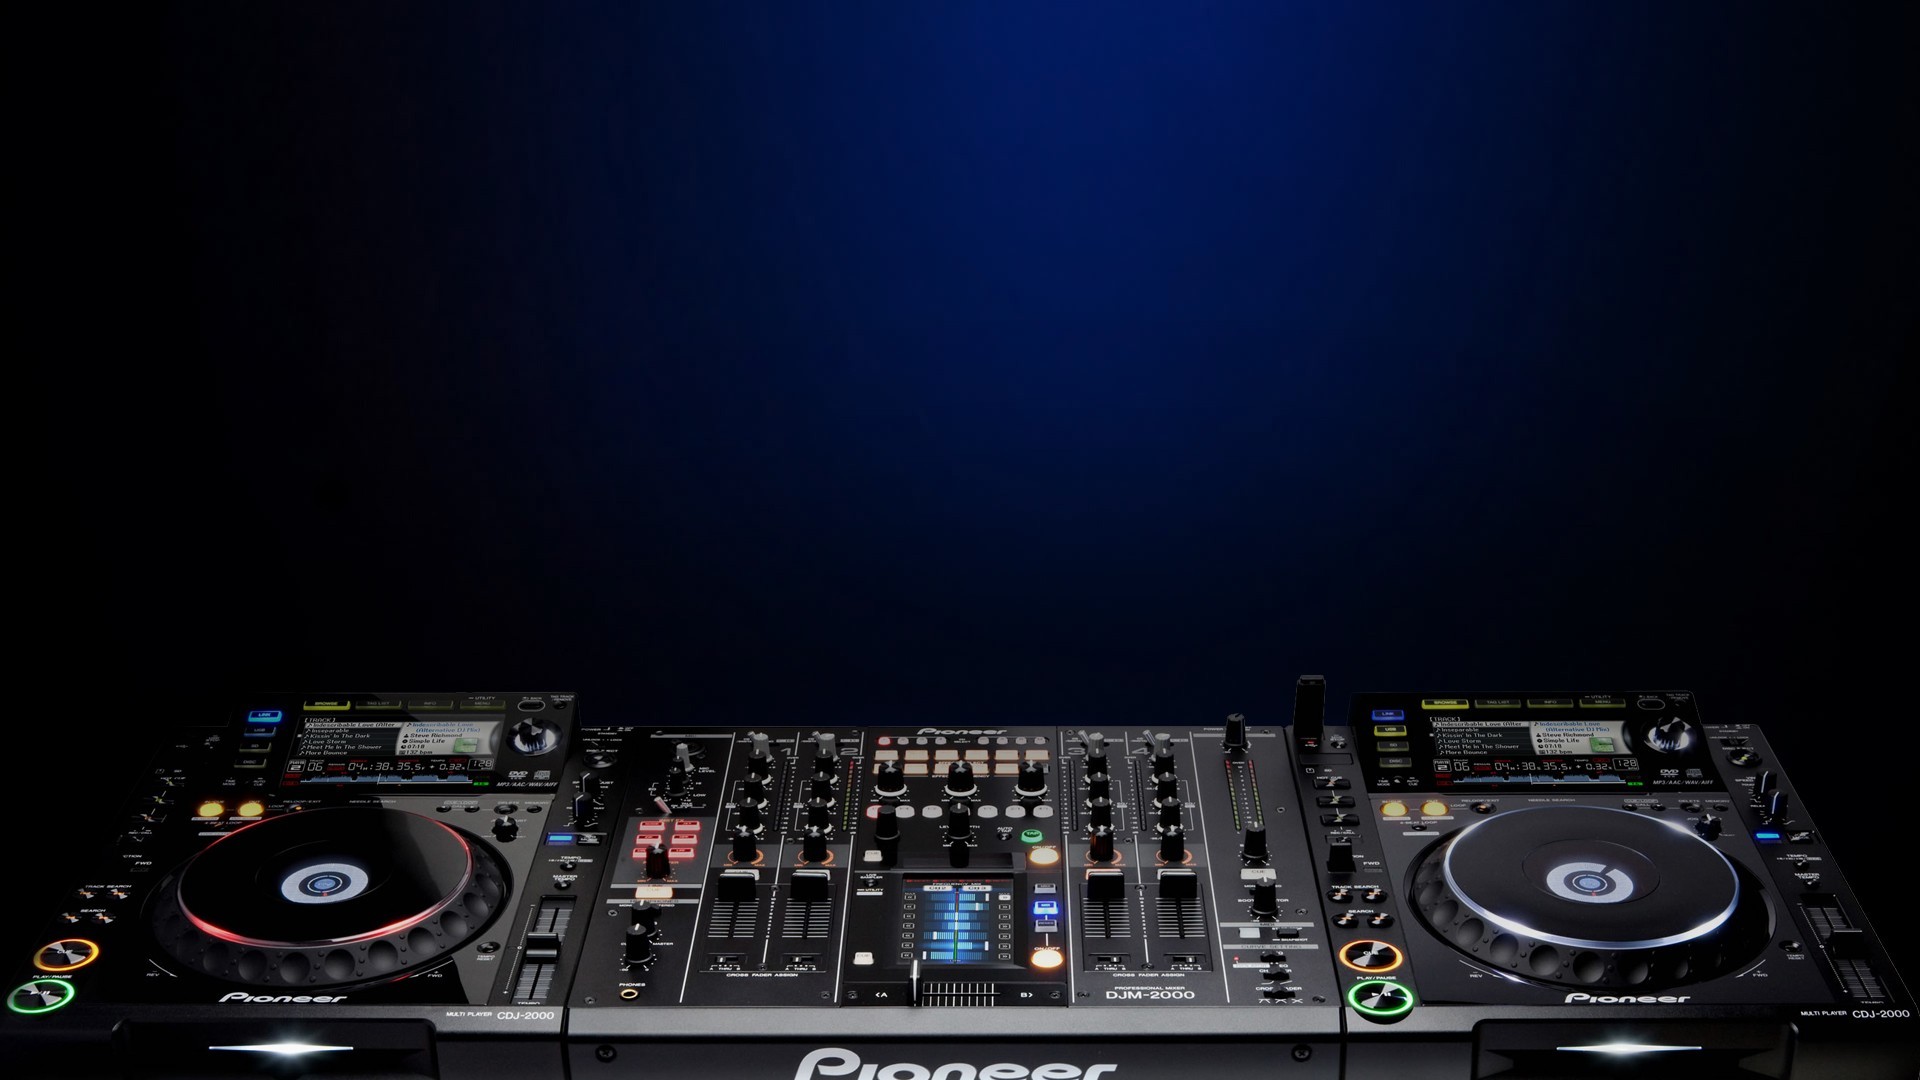 General 1920x1080 DJ turntables music mixing consoles pioneer (logo) gradient blue background simple background technology